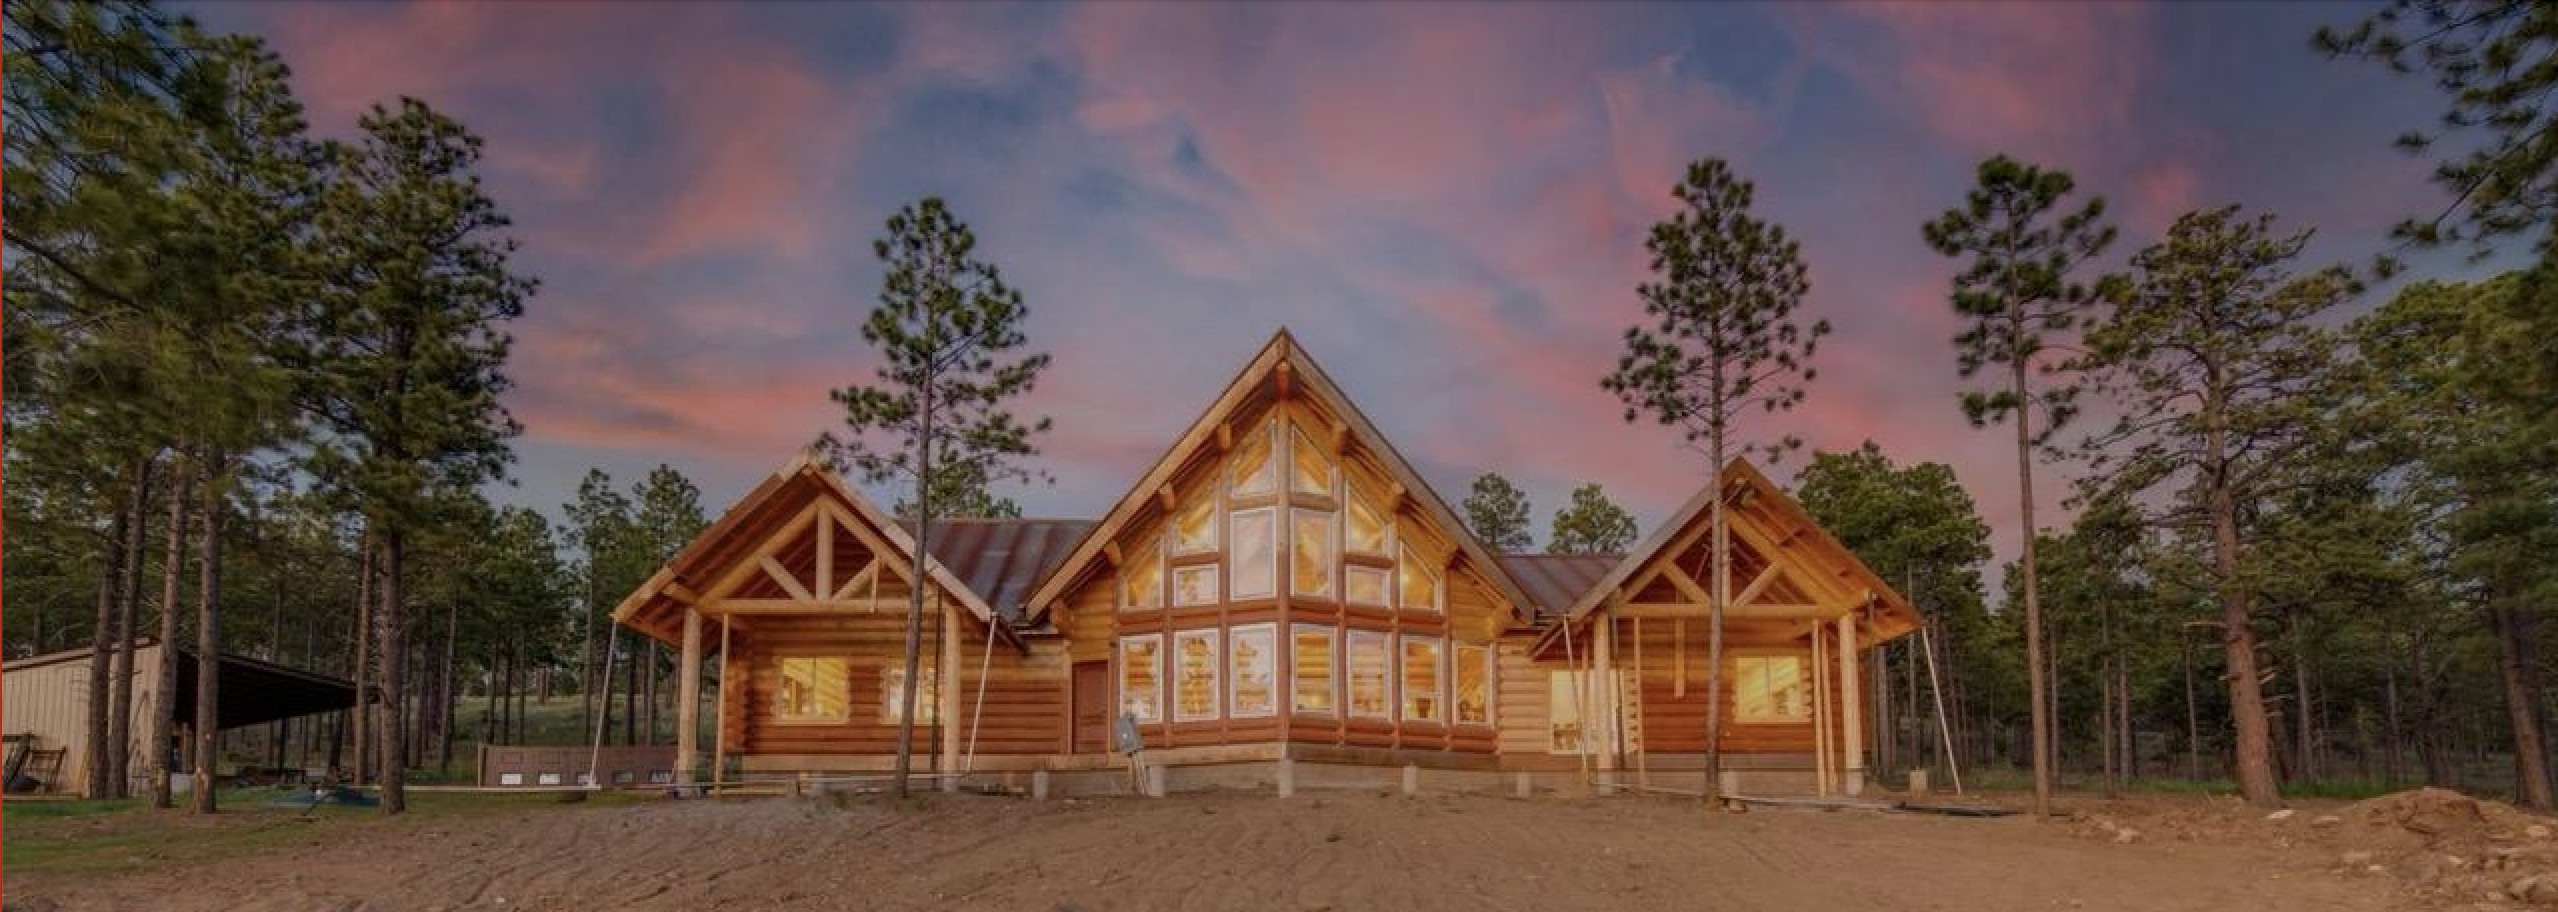 milled log home in Arizona at sunet